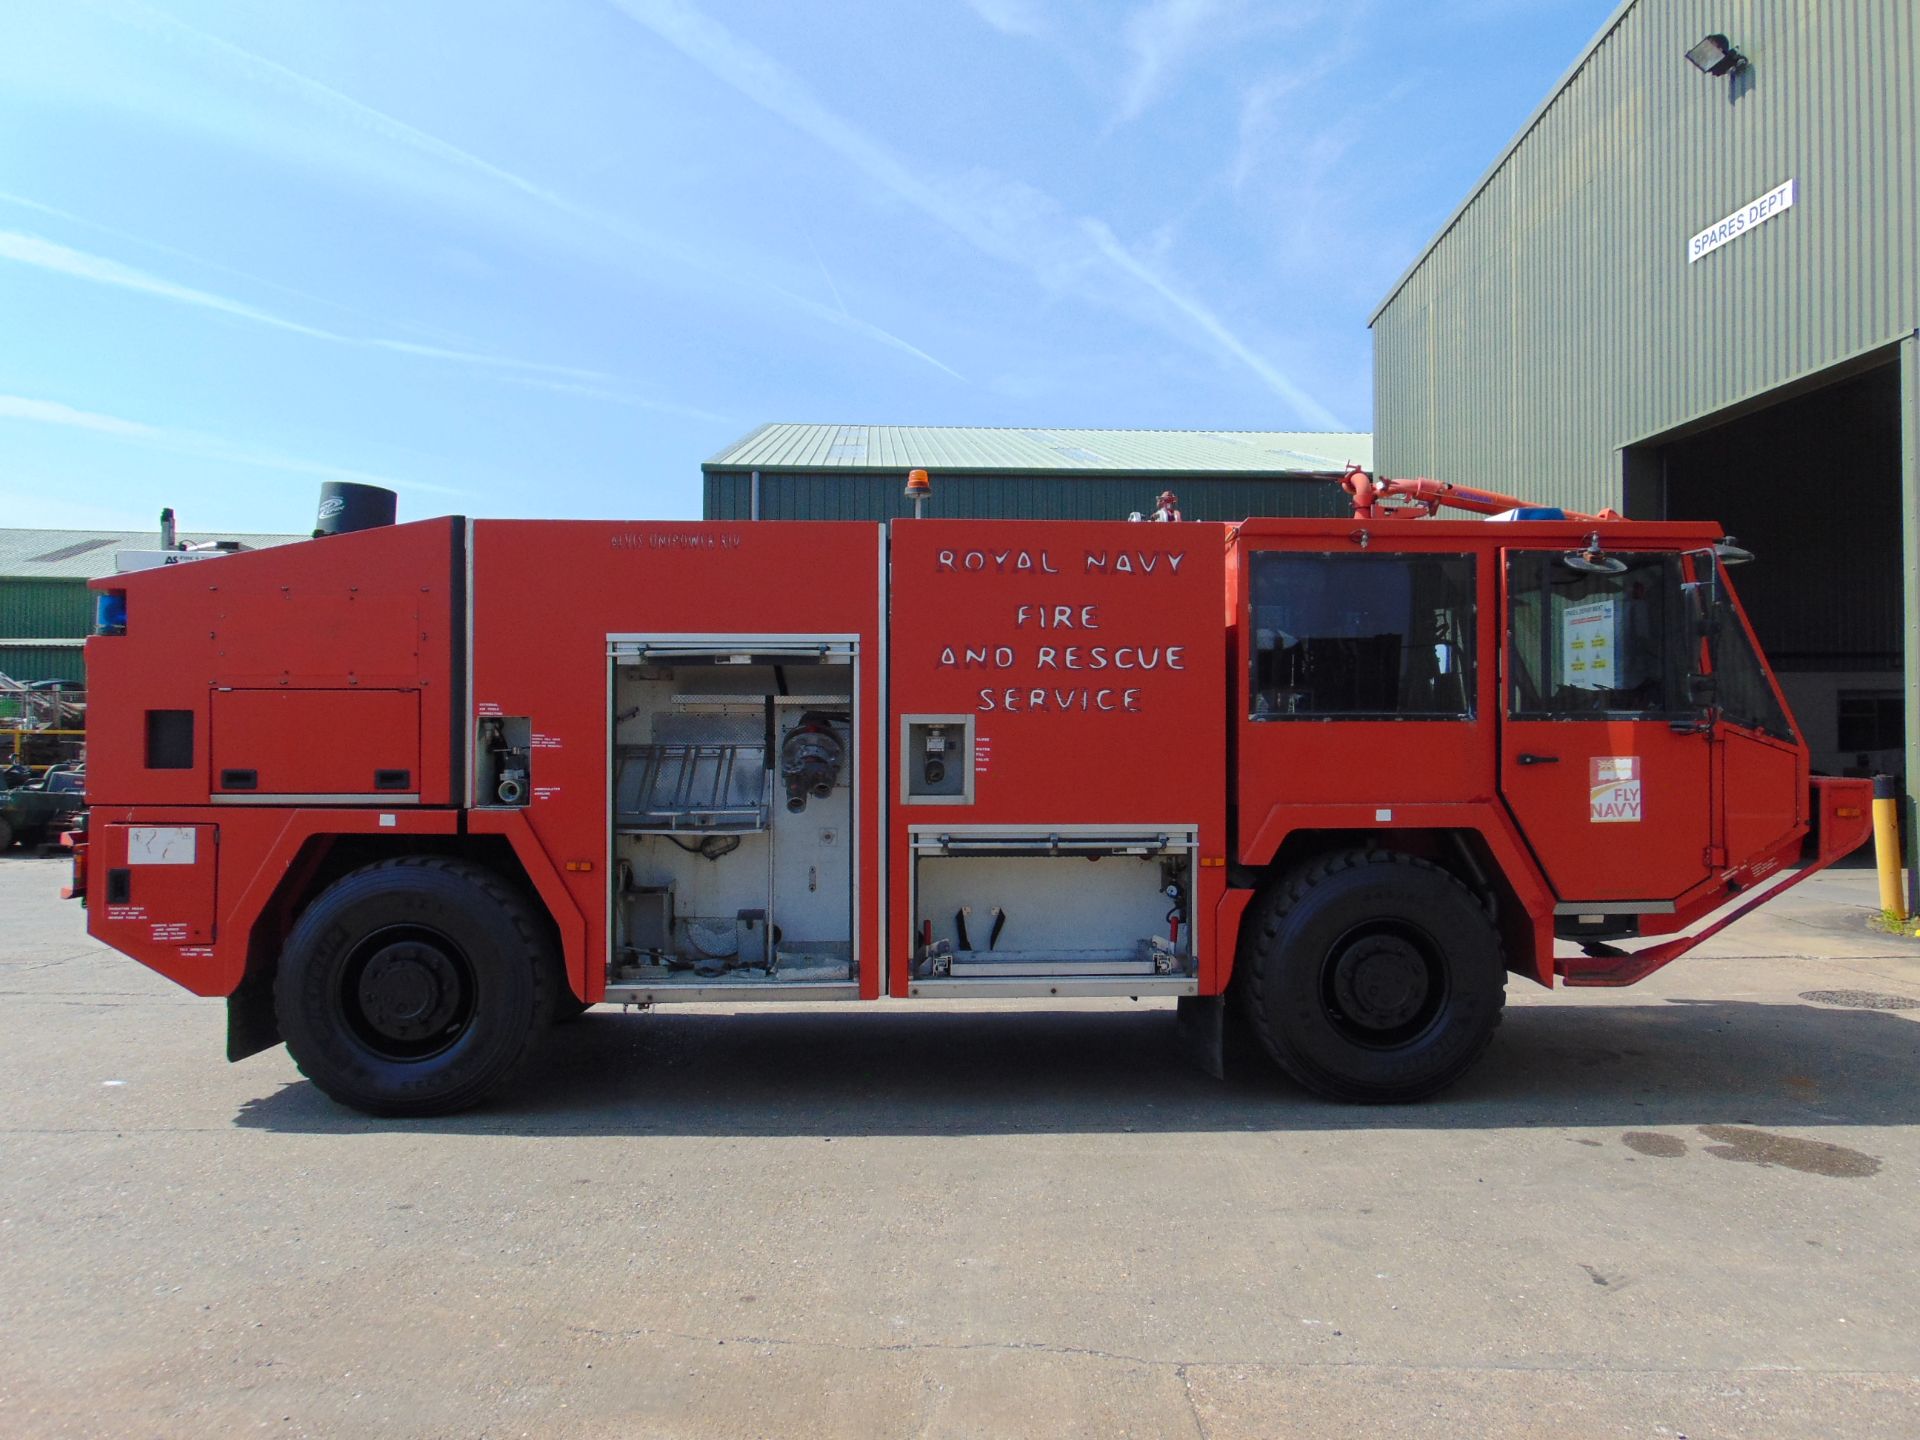 Unipower 4 x 4 Airport Fire Fighting Appliance - Rapid Intervention Vehicle - Image 28 of 73